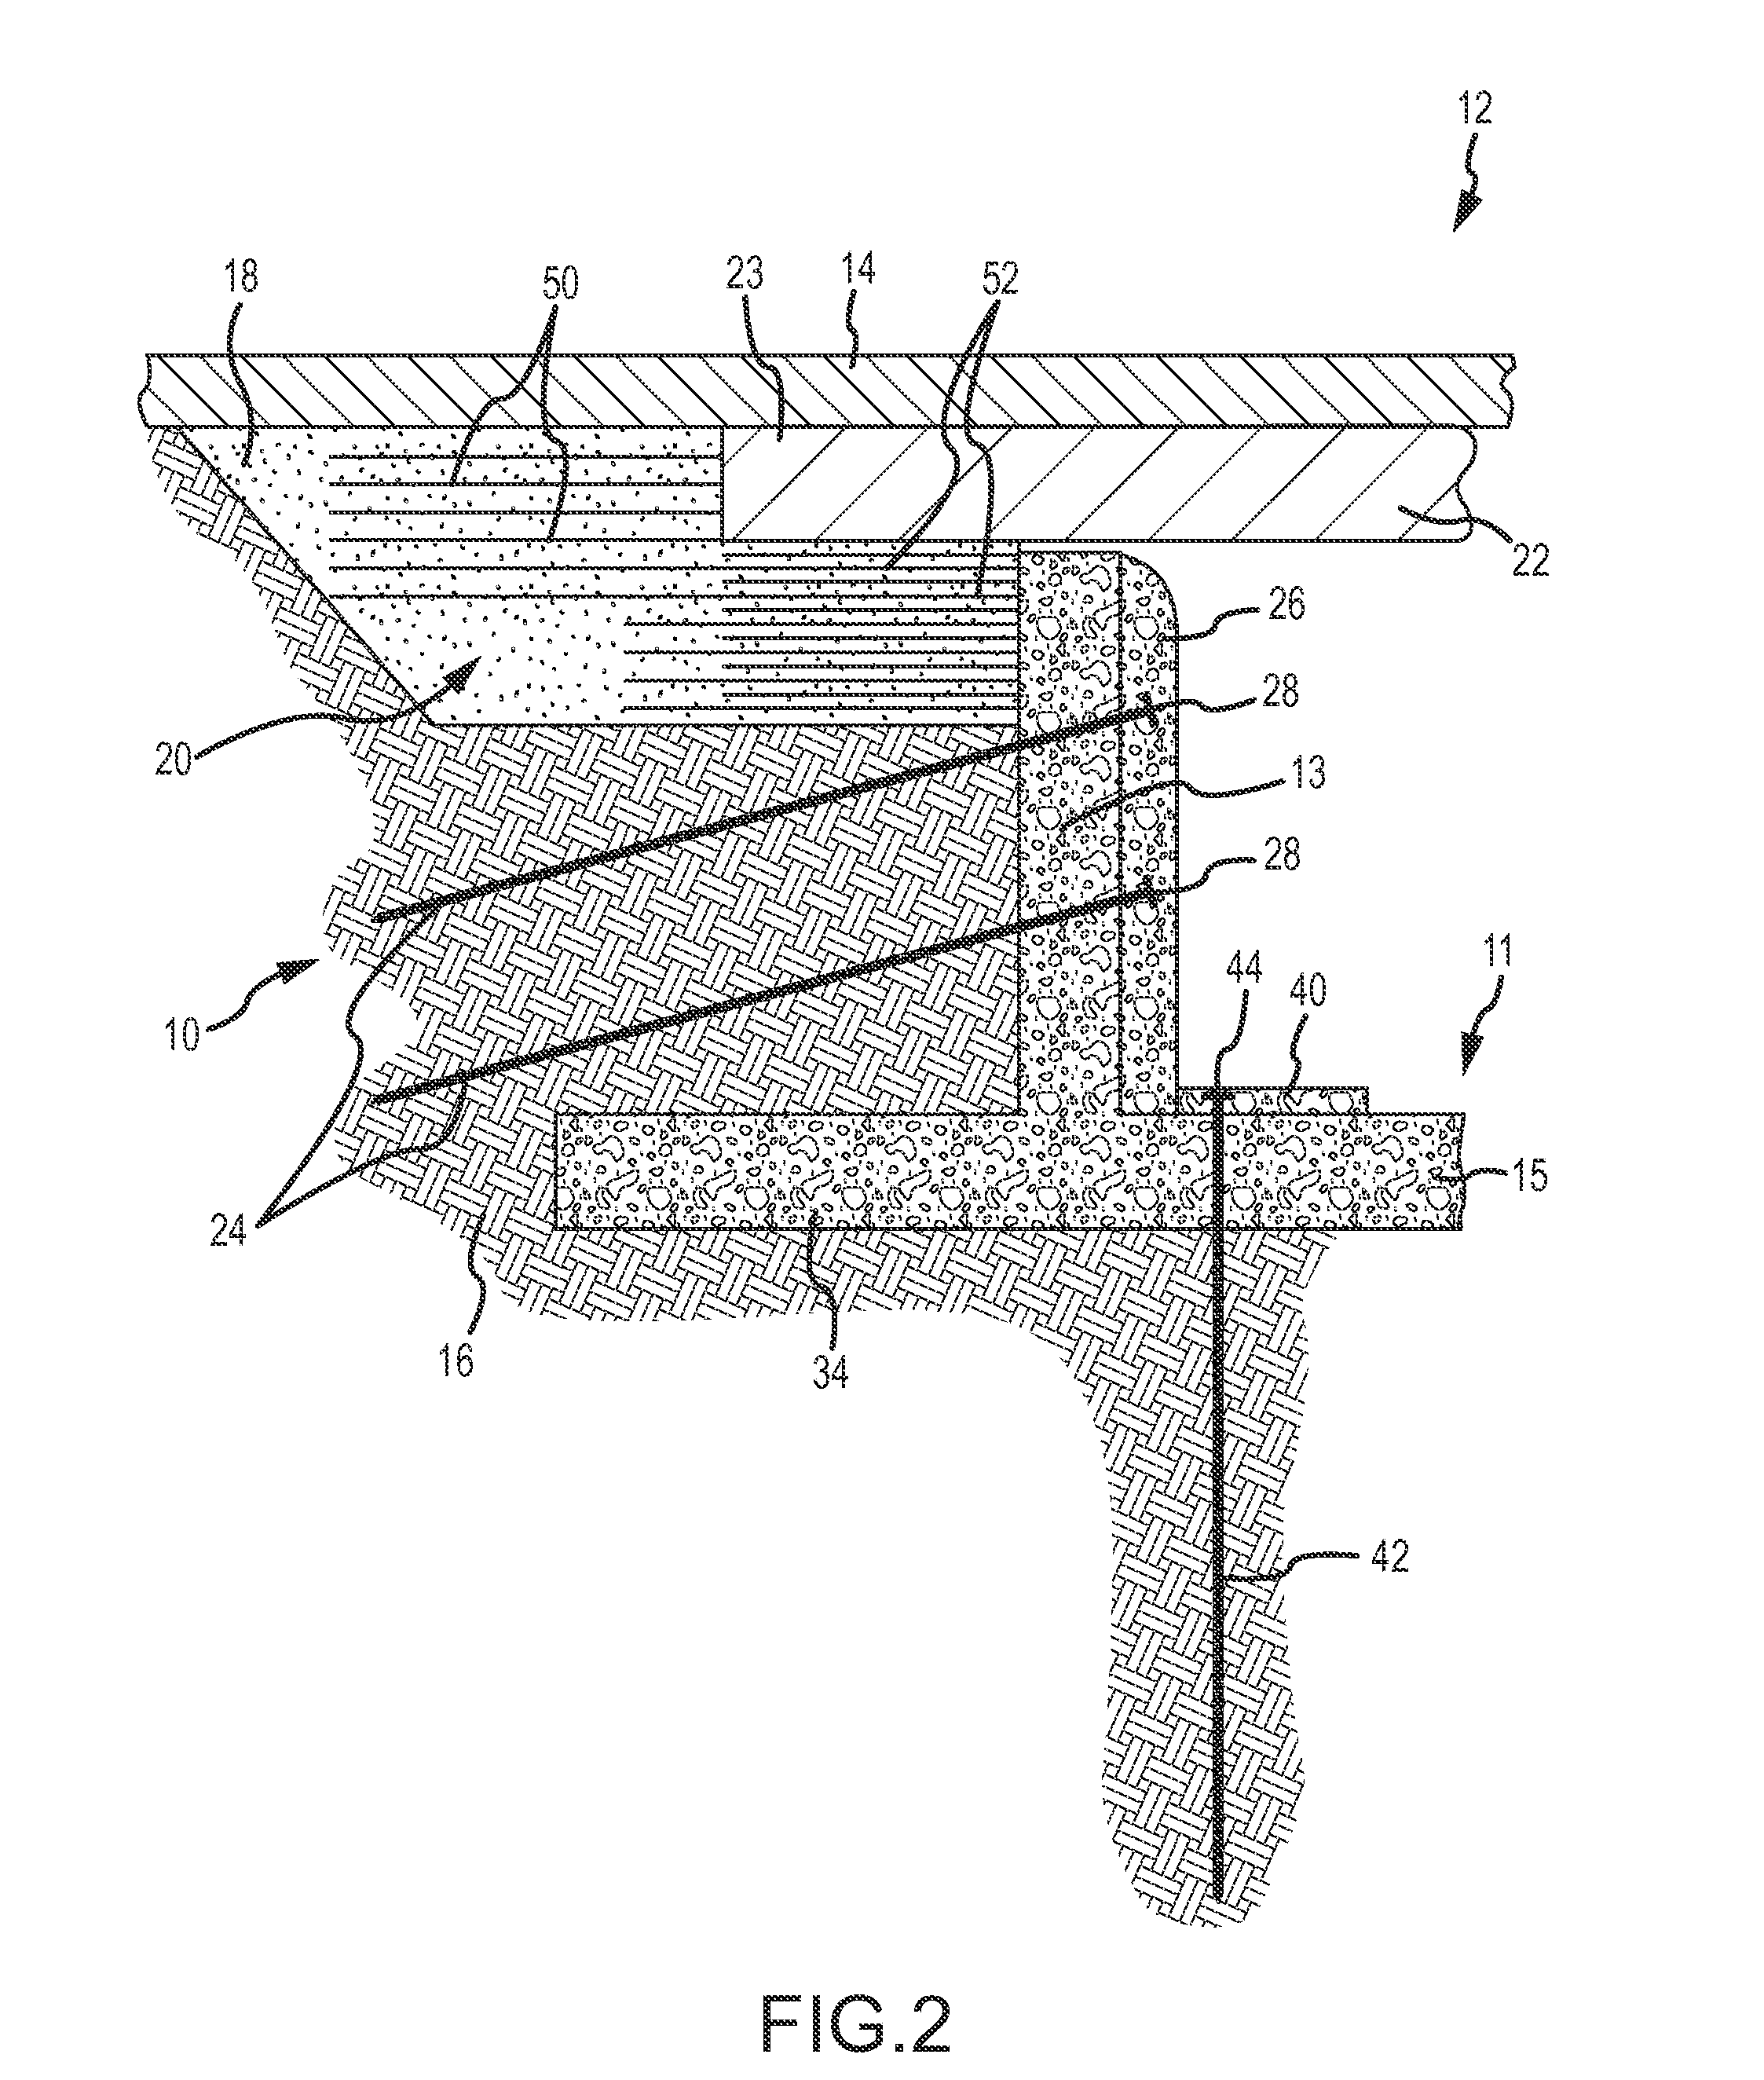 System and method for repair of bridge abutment and culvert constructions